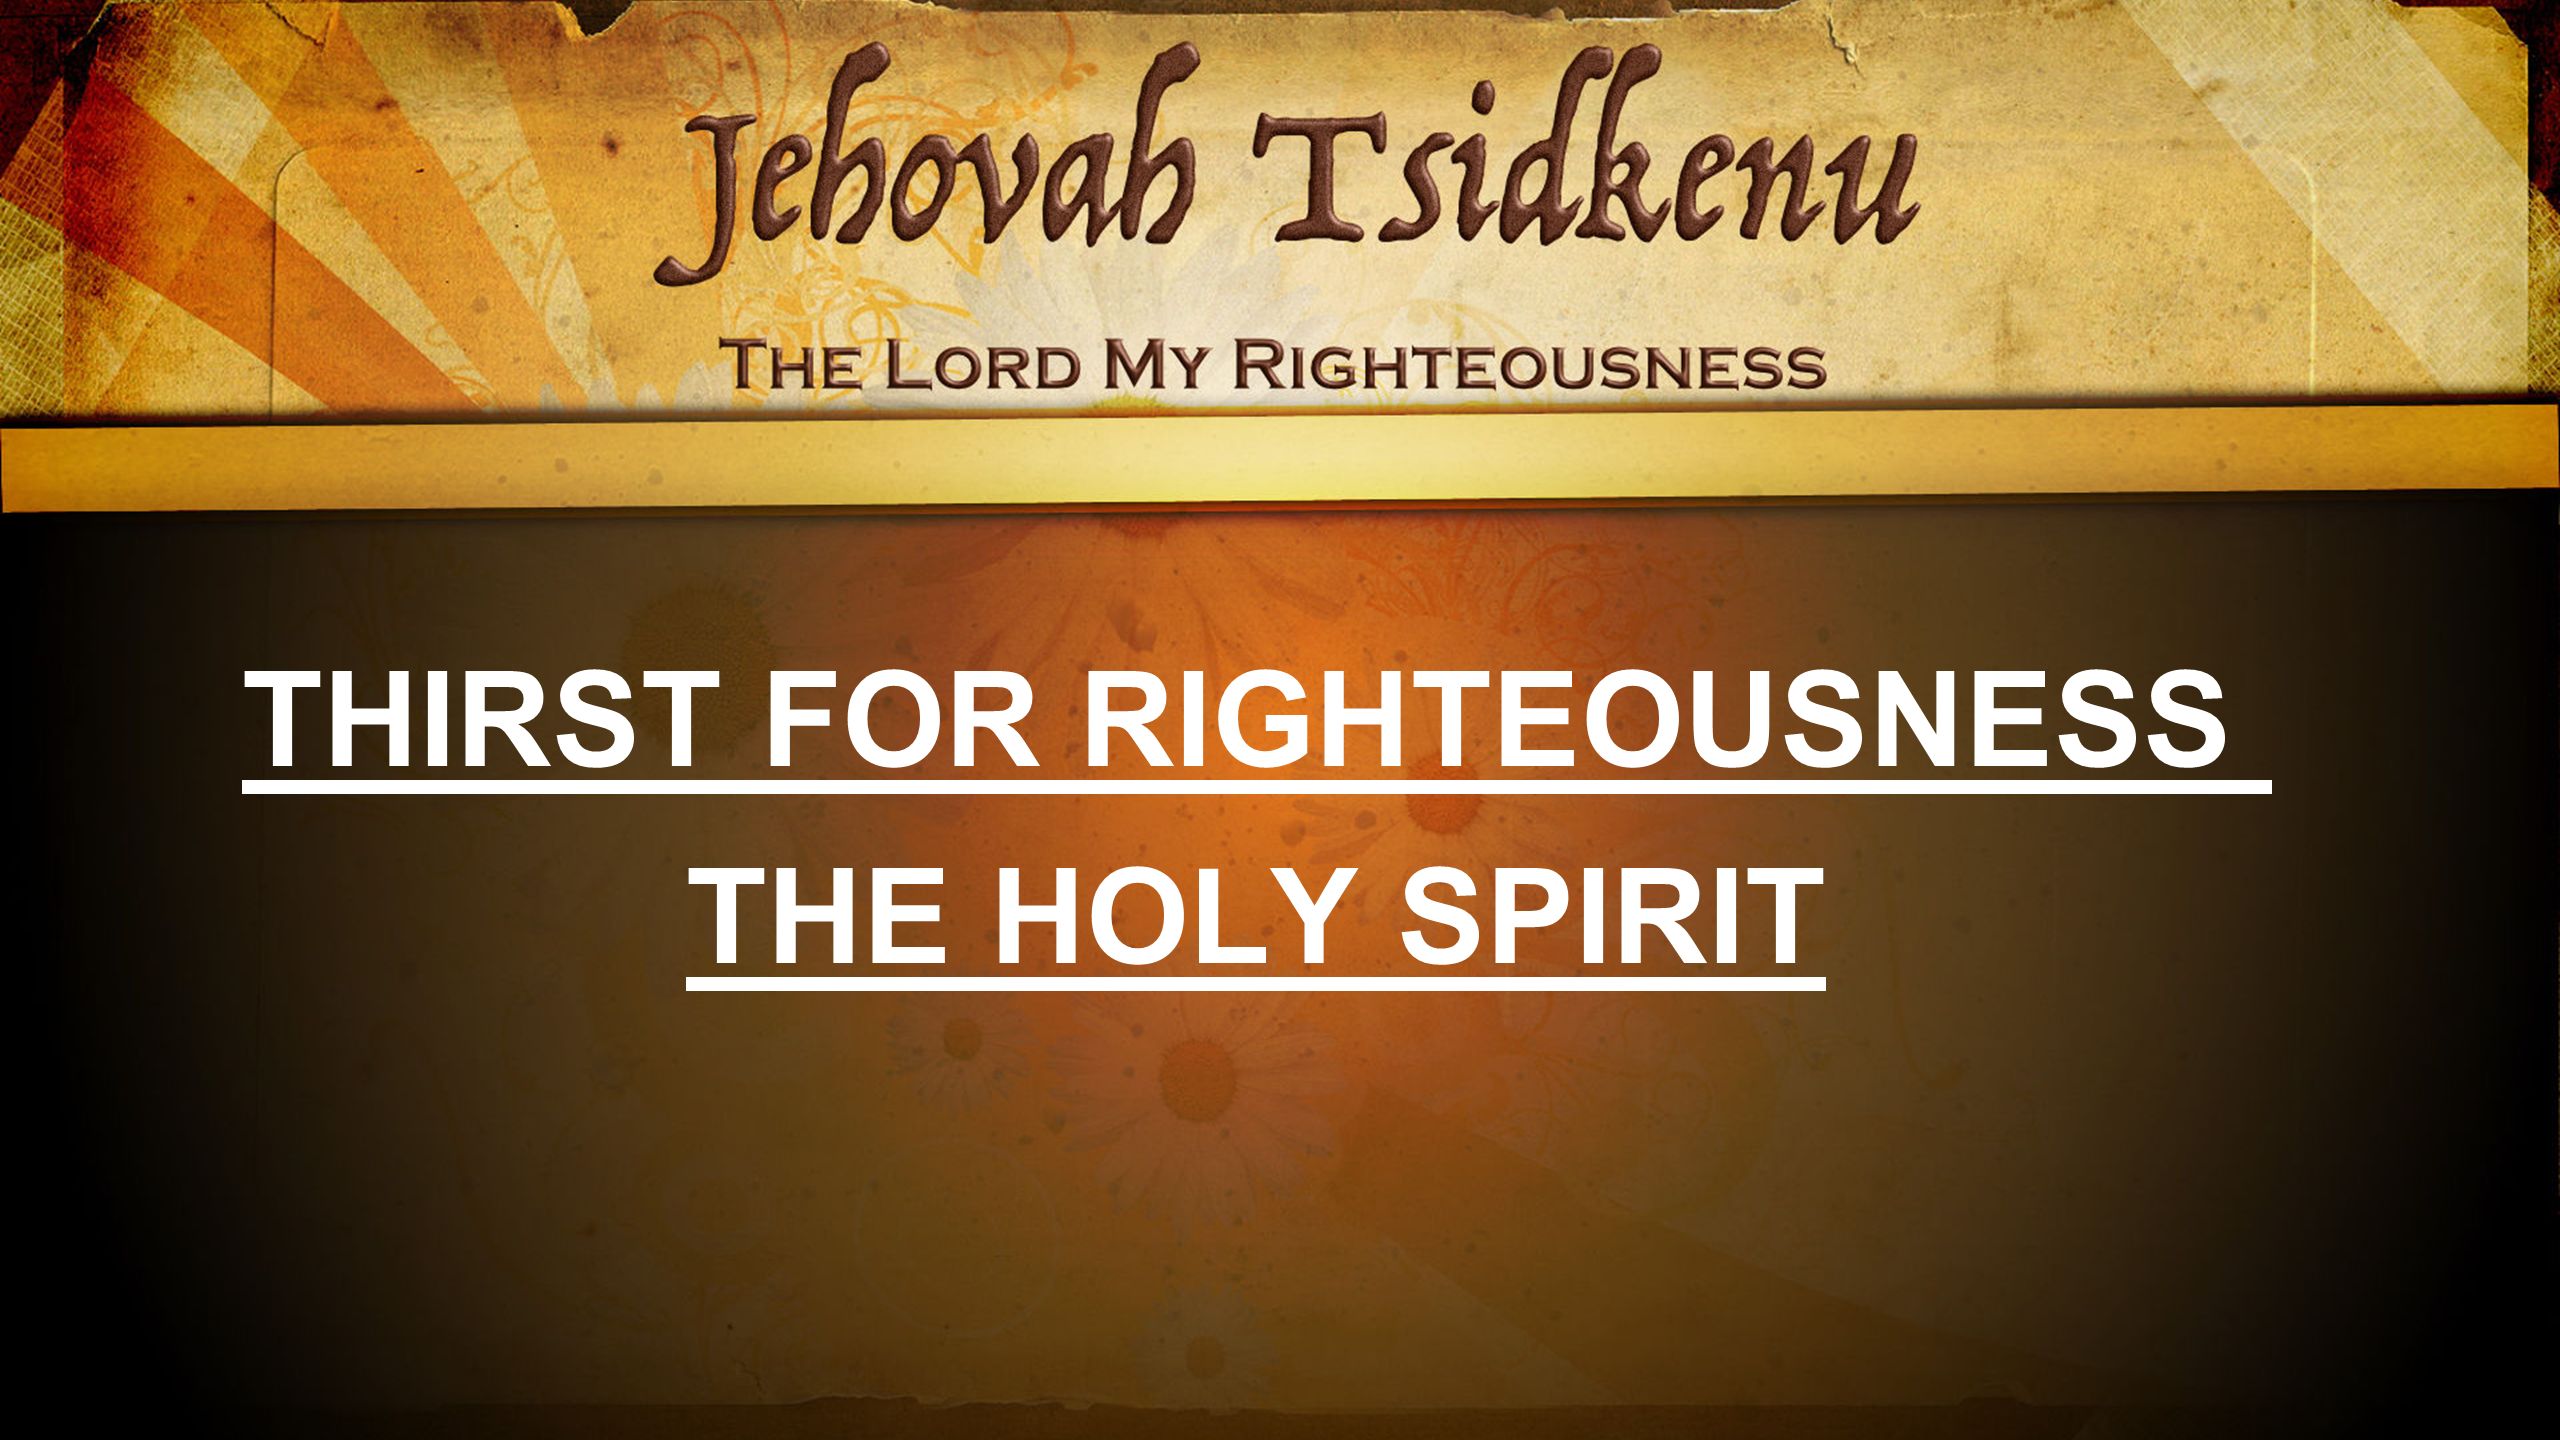 THIRST FOR RIGHTEOUSNESS THE HOLY SPIRIT